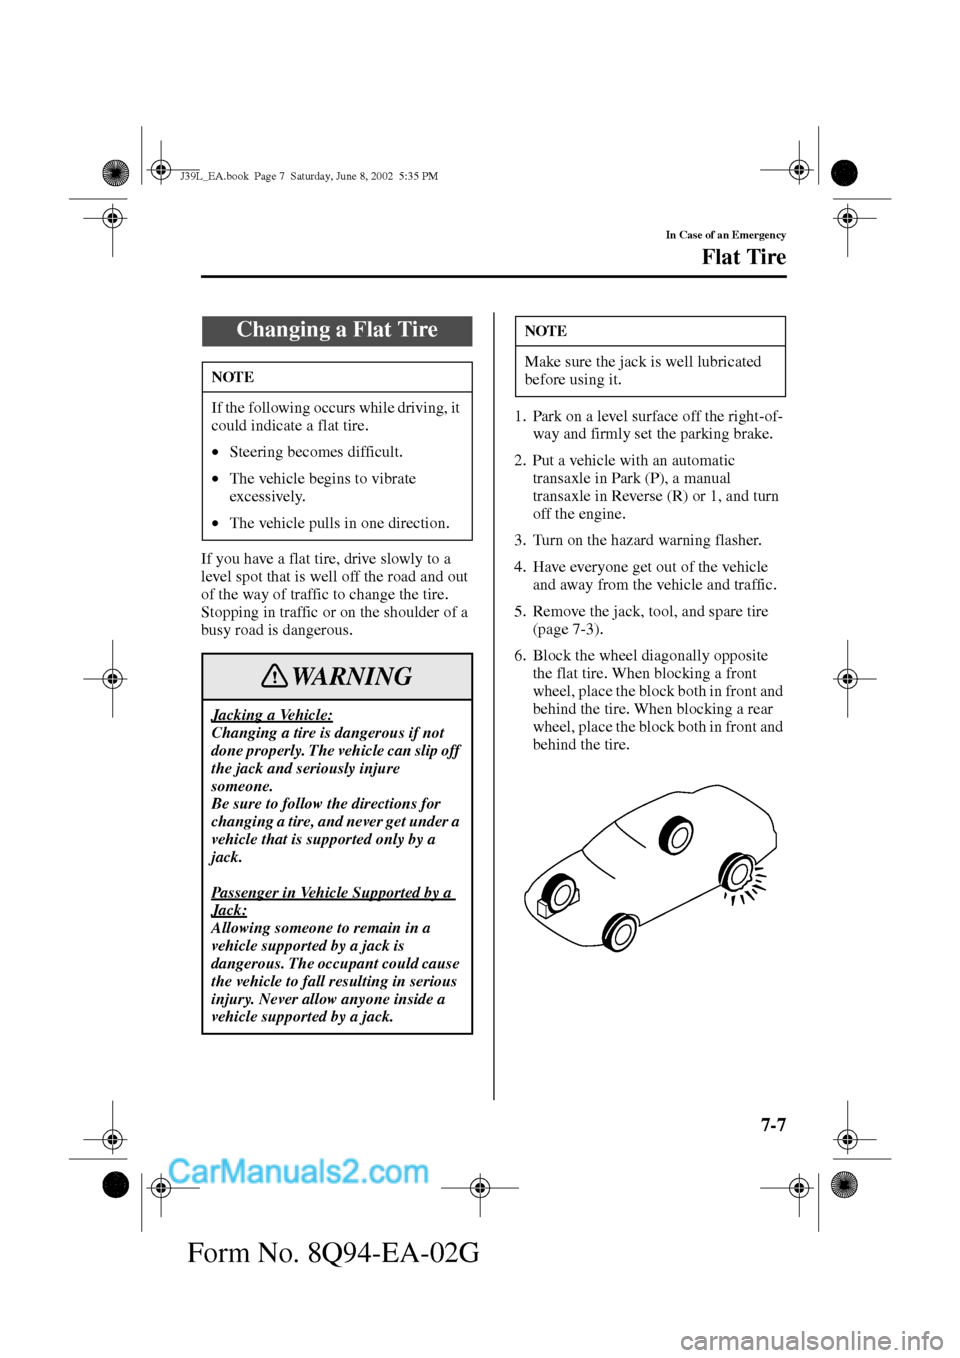 MAZDA MODEL PROTÉGÉ 2003  Owners Manual (in English) 7-7
In Case of an Emergency
Flat Tire
Form No. 8Q94-EA-02G
If you have a flat tire, drive slowly to a 
level spot that is well off the road and out 
of the way of traffic to change the tire.
Stopping 